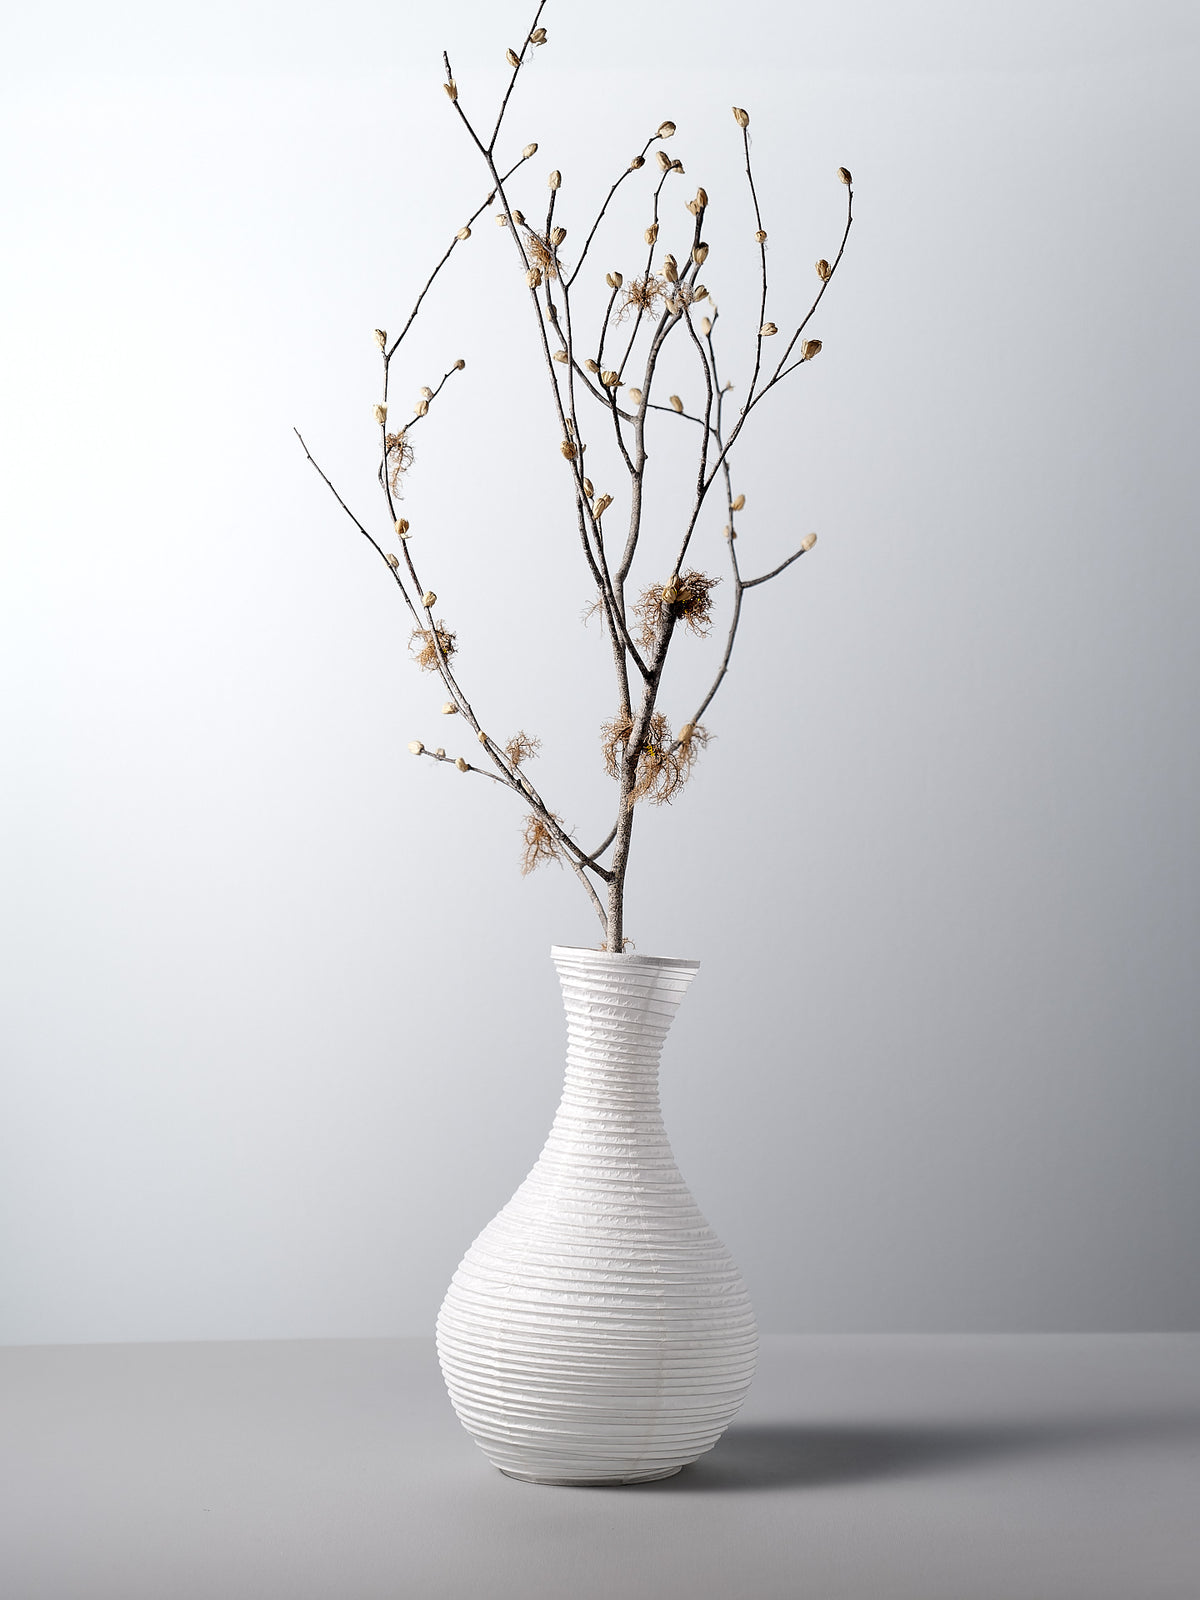 A Nobi-tsutsu Paper Vase - №5 by Hayashi Kougei with a branch in it.